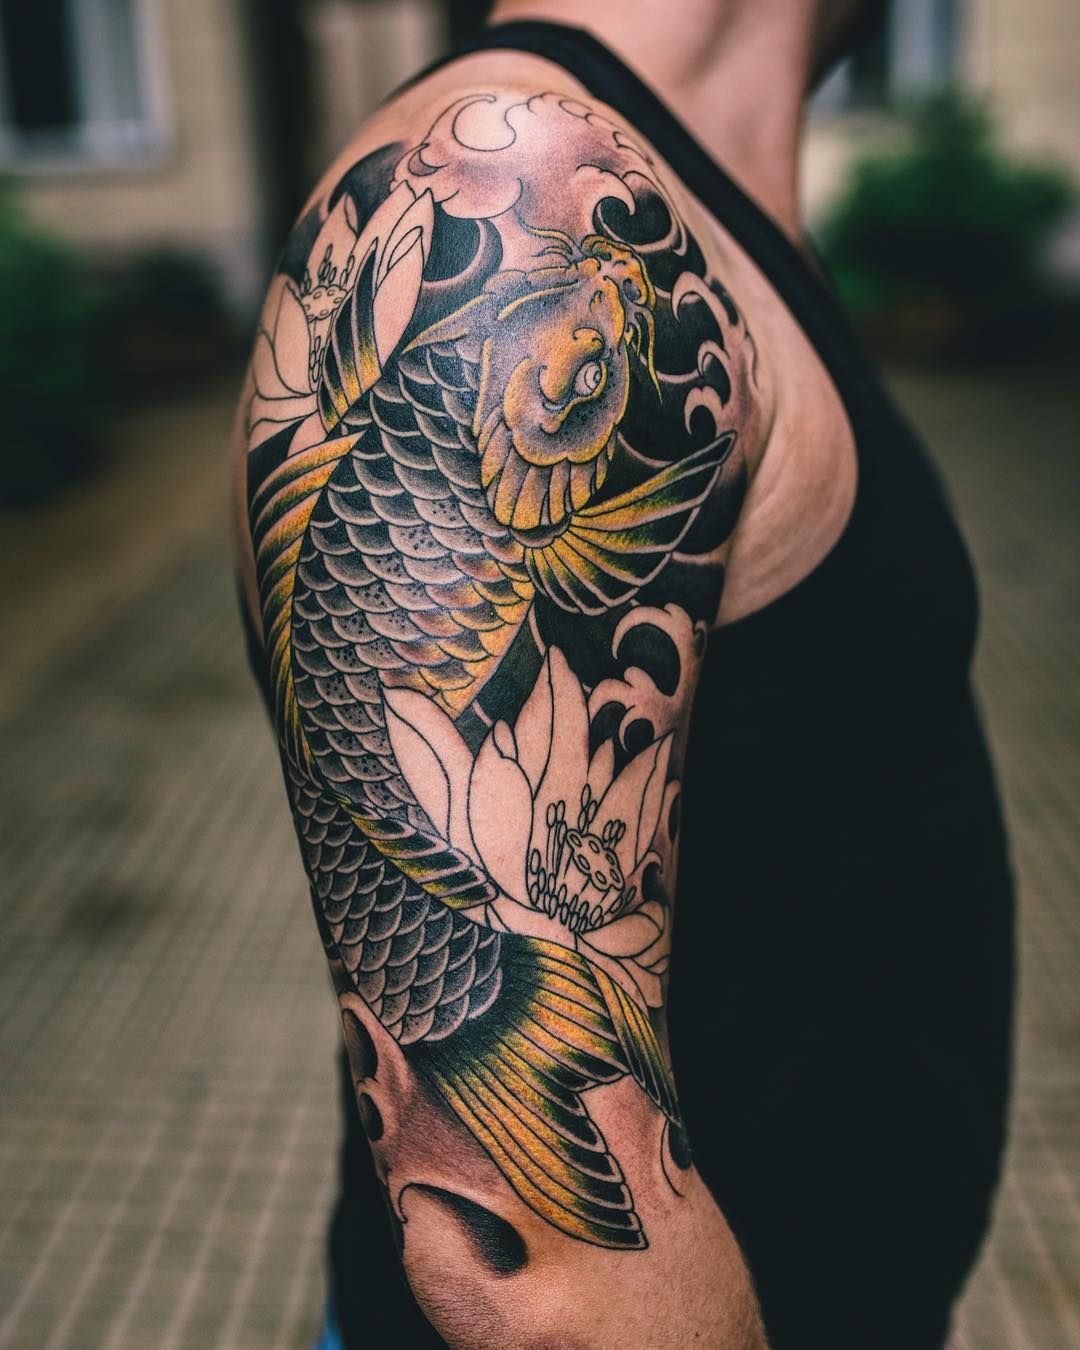 A koi fish tattoo is a beautiful design that shows courage and overcoming obstacles. A koi fish is the perfect choice for someone who lives by their o